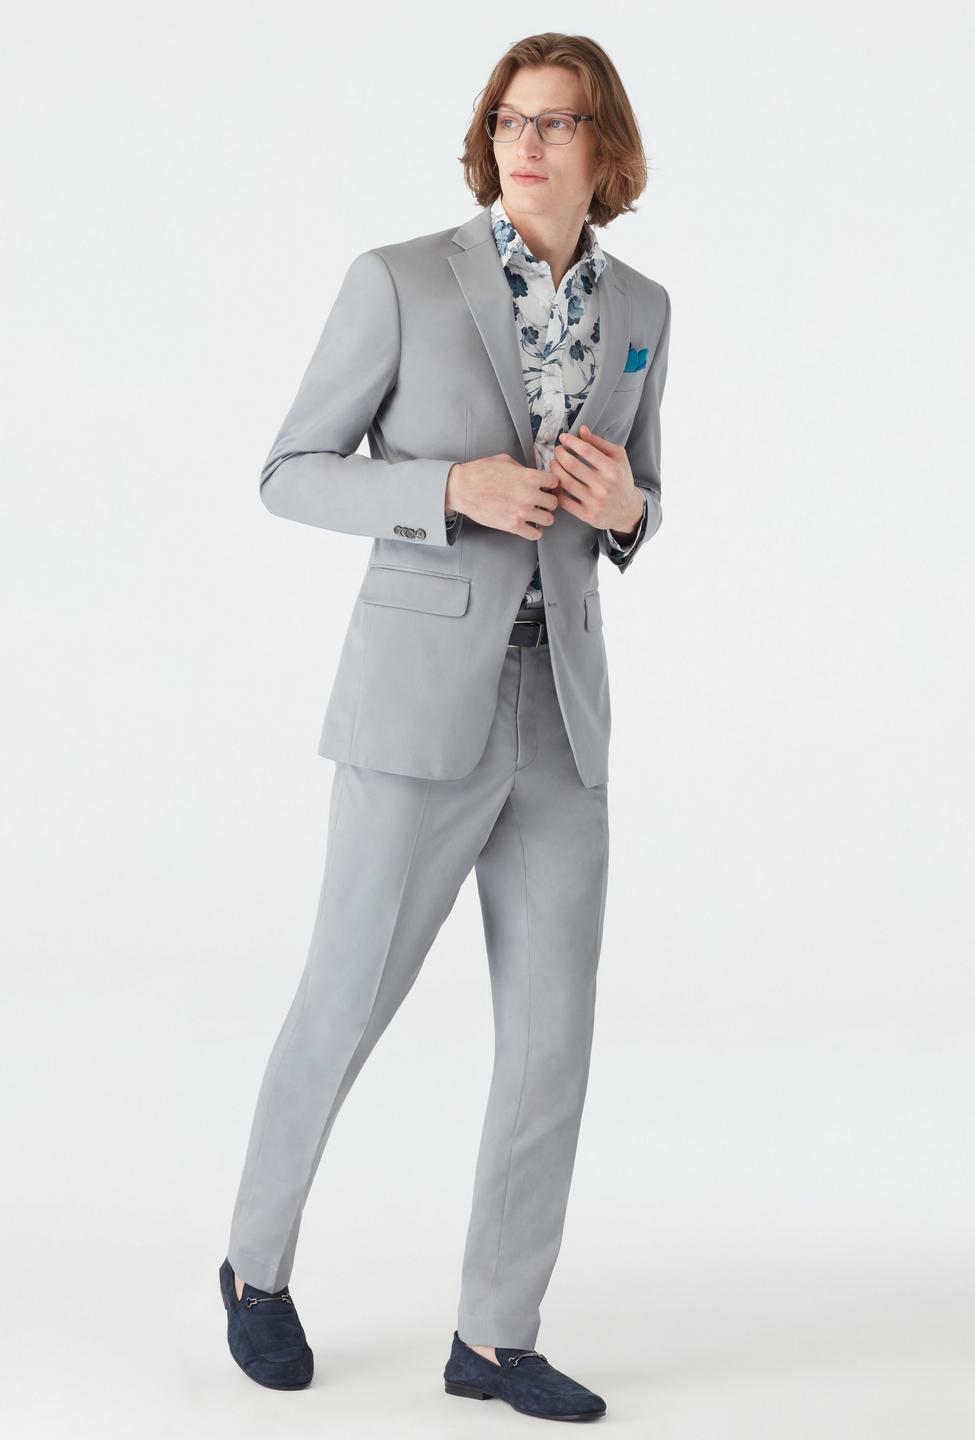 indochino.com | Hartley Cotton Stretch Dove Gray Suit